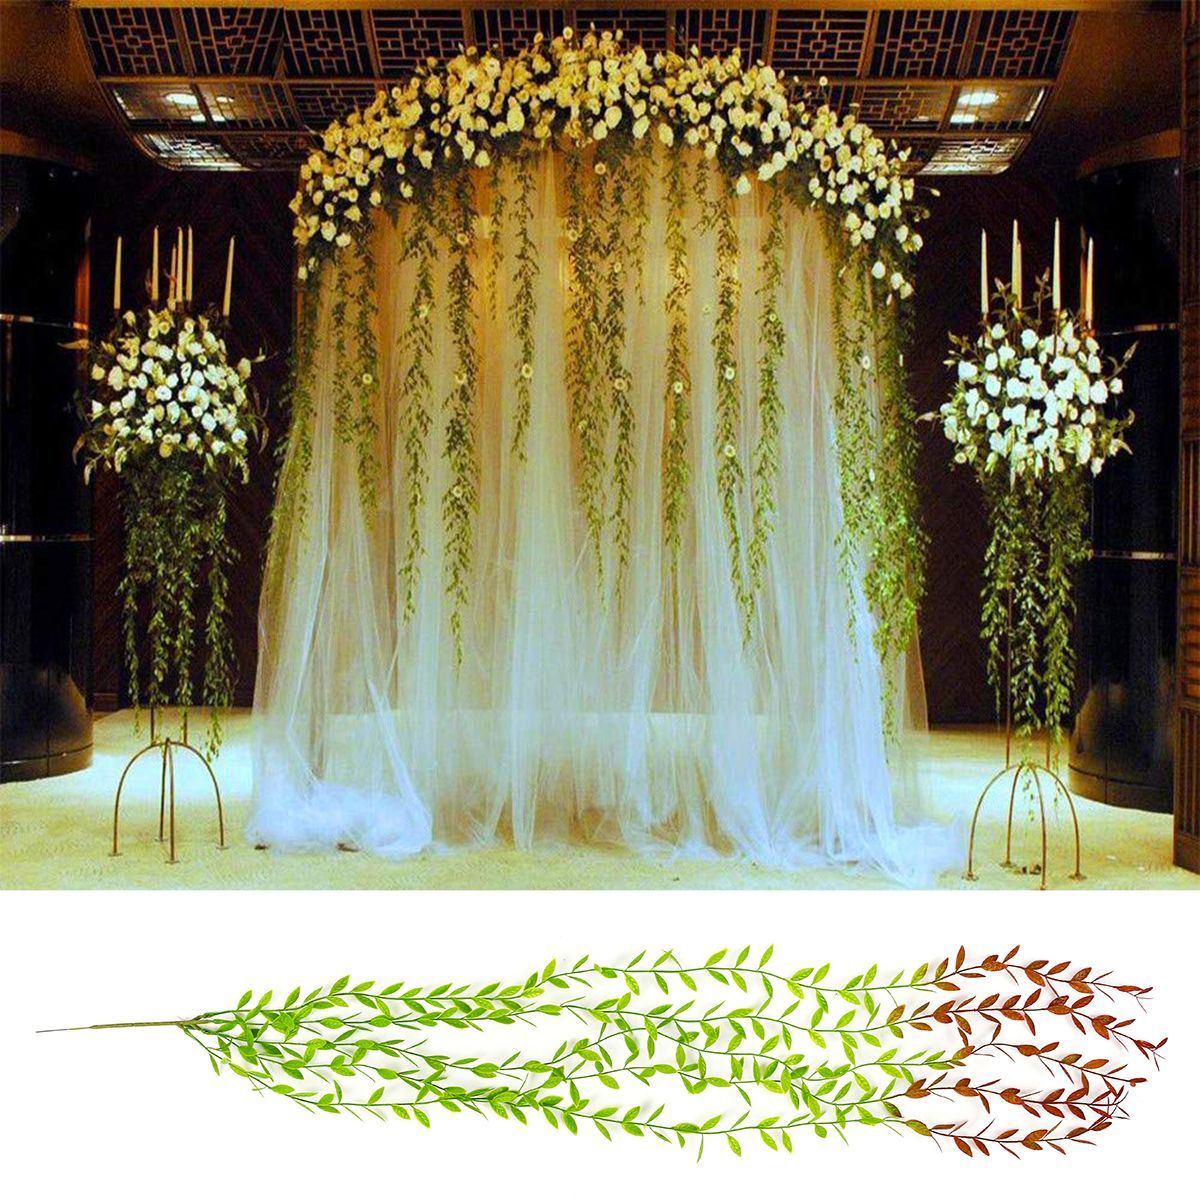 6-Pcs-Artificial-Vines-Plant-Leaf-Ivy-Greenery-Garland-Willow-Leaves-Hanging-Wedding-Decor-Supplies-1536125